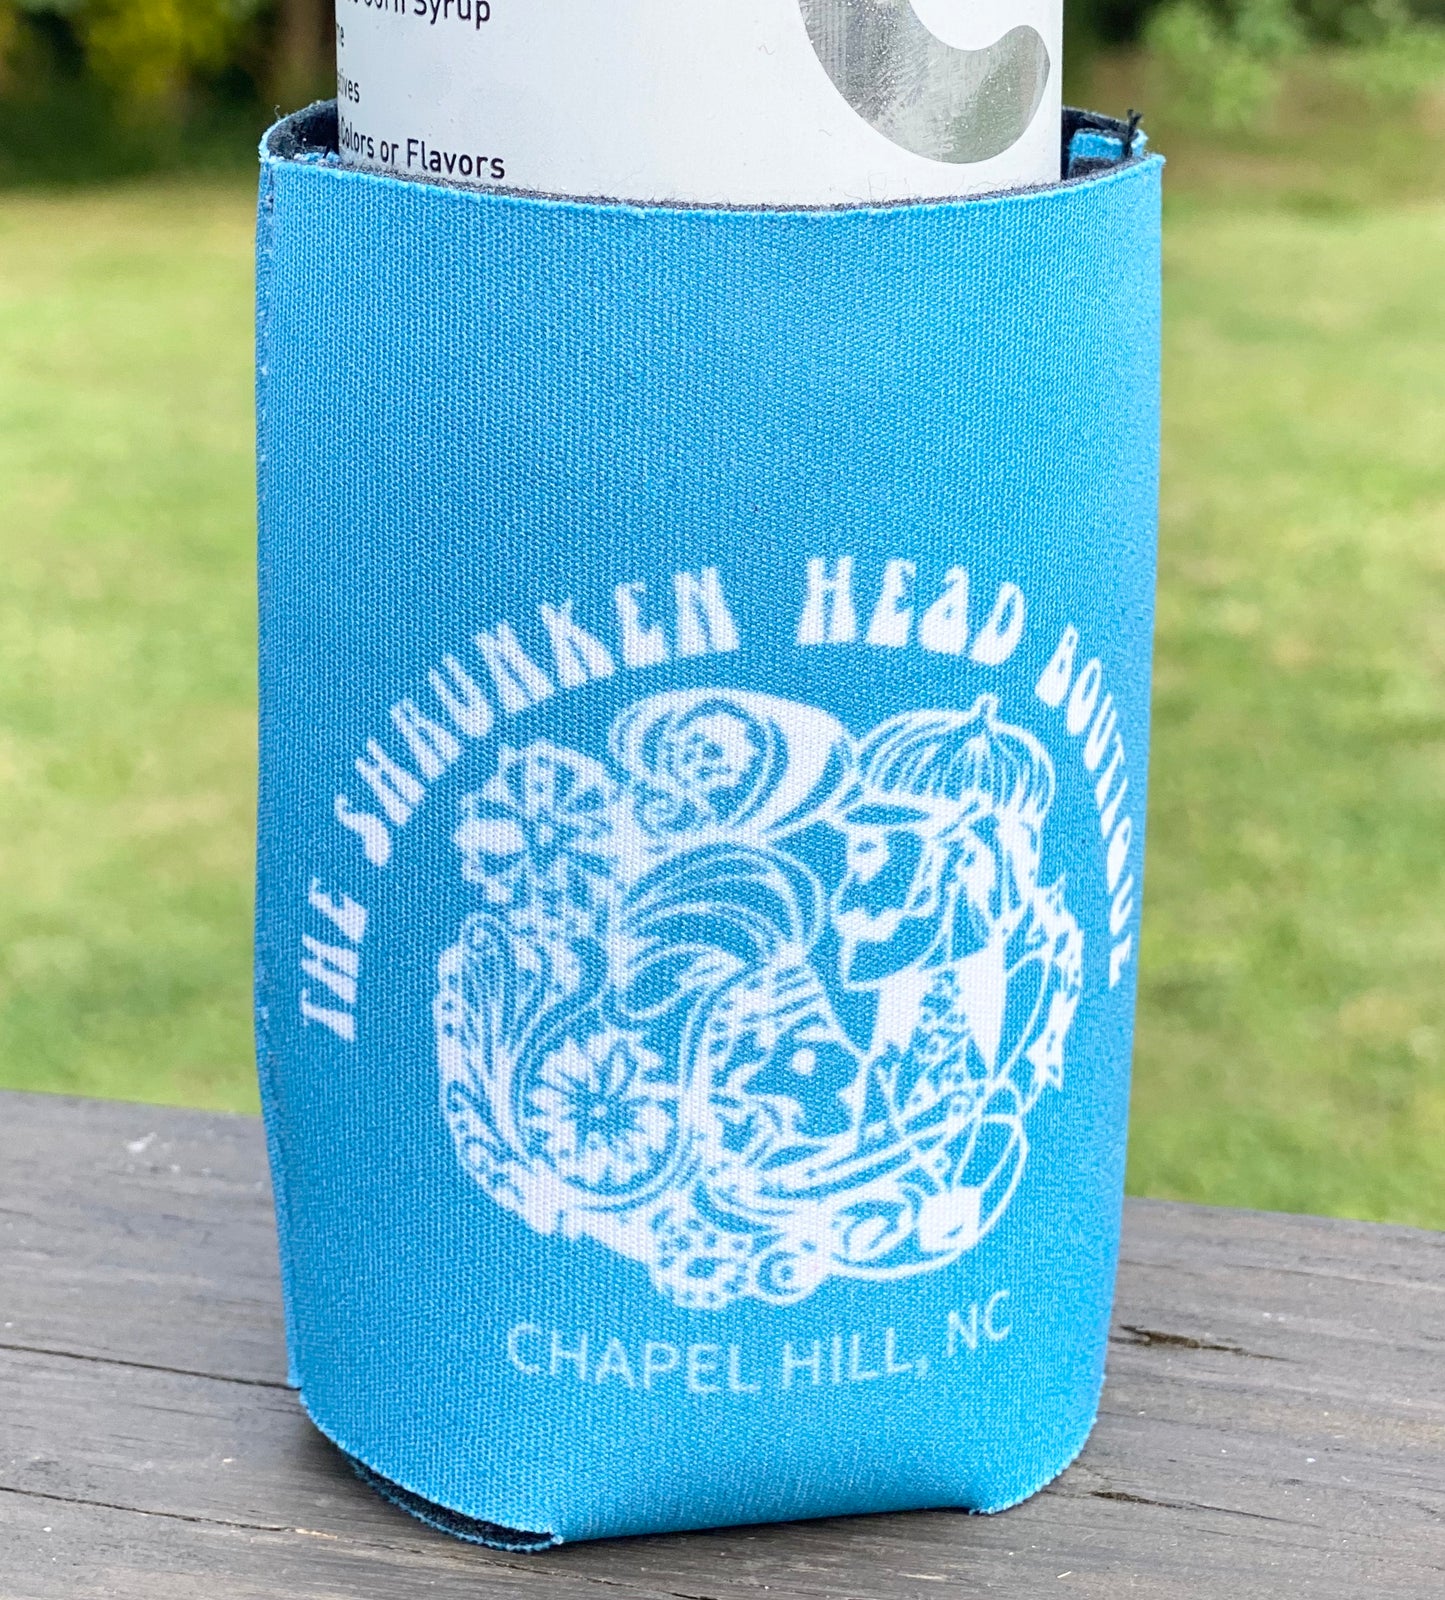 UNC Beat Dook Can Cooler for Standard 12 oz Cans by SHB